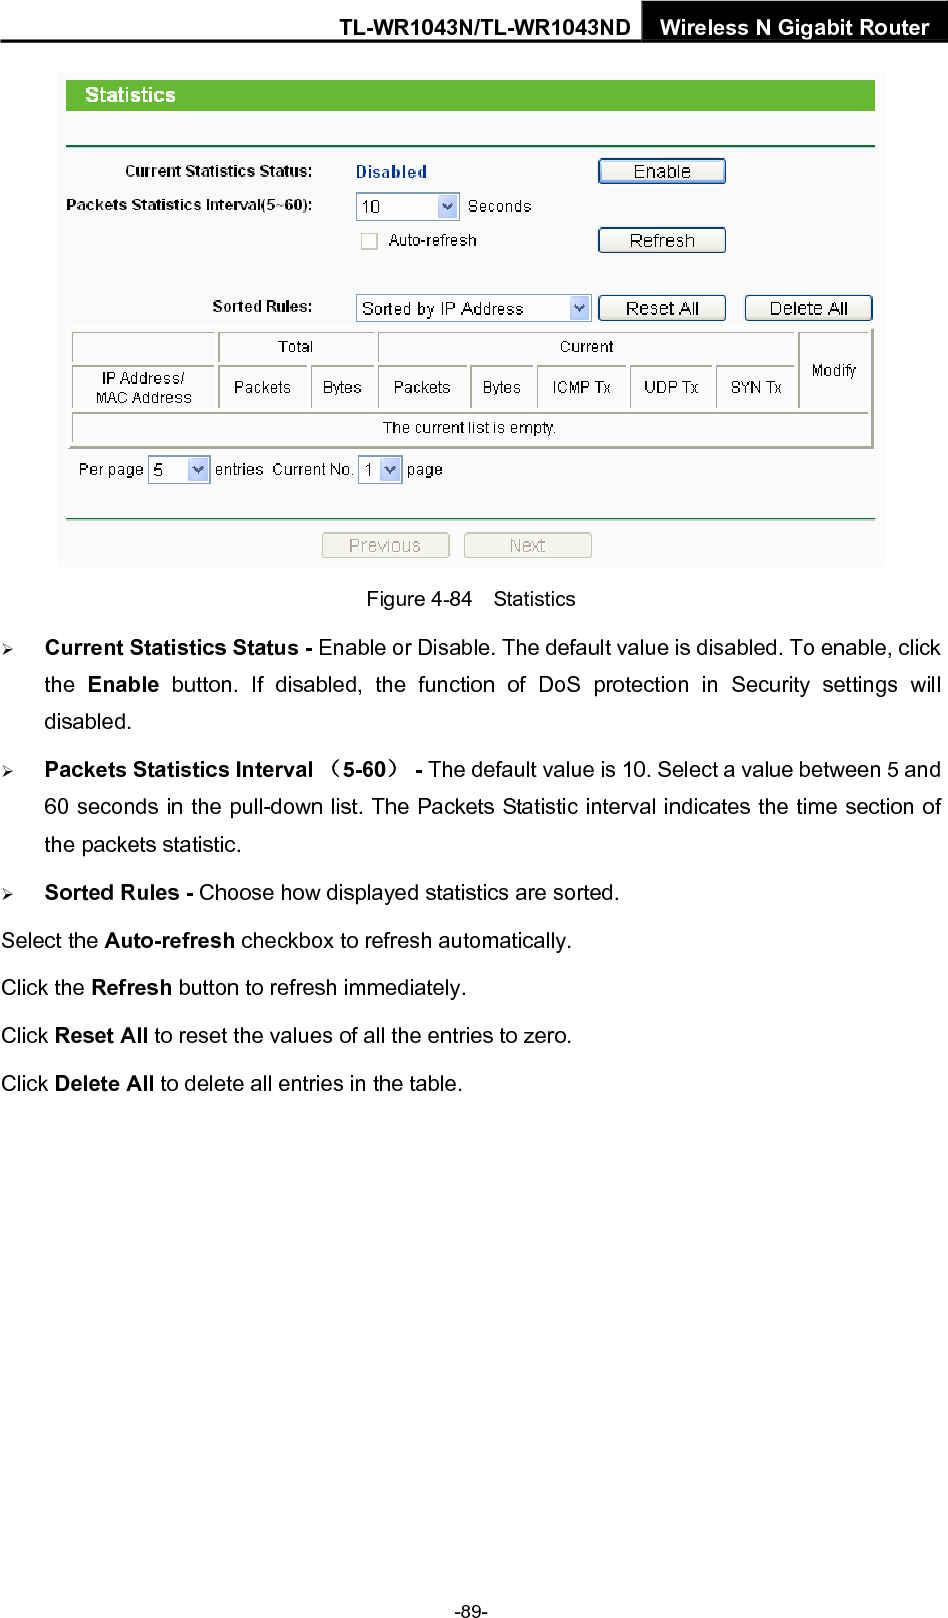 TL-WR1043N/TL-WR1043ND Wireless N Gigabit Router  Figure 4-84  Statistics ¾ Current Statistics Status - Enable or Disable. The default value is disabled. To enable, click the  Enable button. If disabled, the function of DoS protection in Security settings will disabled. ¾ Packets Statistics Interval （5-60） - The default value is 10. Select a value between 5 and 60 seconds in the pull-down list. The Packets Statistic interval indicates the time section of the packets statistic.   ¾ Sorted Rules - Choose how displayed statistics are sorted. Select the Auto-refresh checkbox to refresh automatically. Click the Refresh button to refresh immediately. Click Reset All to reset the values of all the entries to zero.   Click Delete All to delete all entries in the table.   -89- 